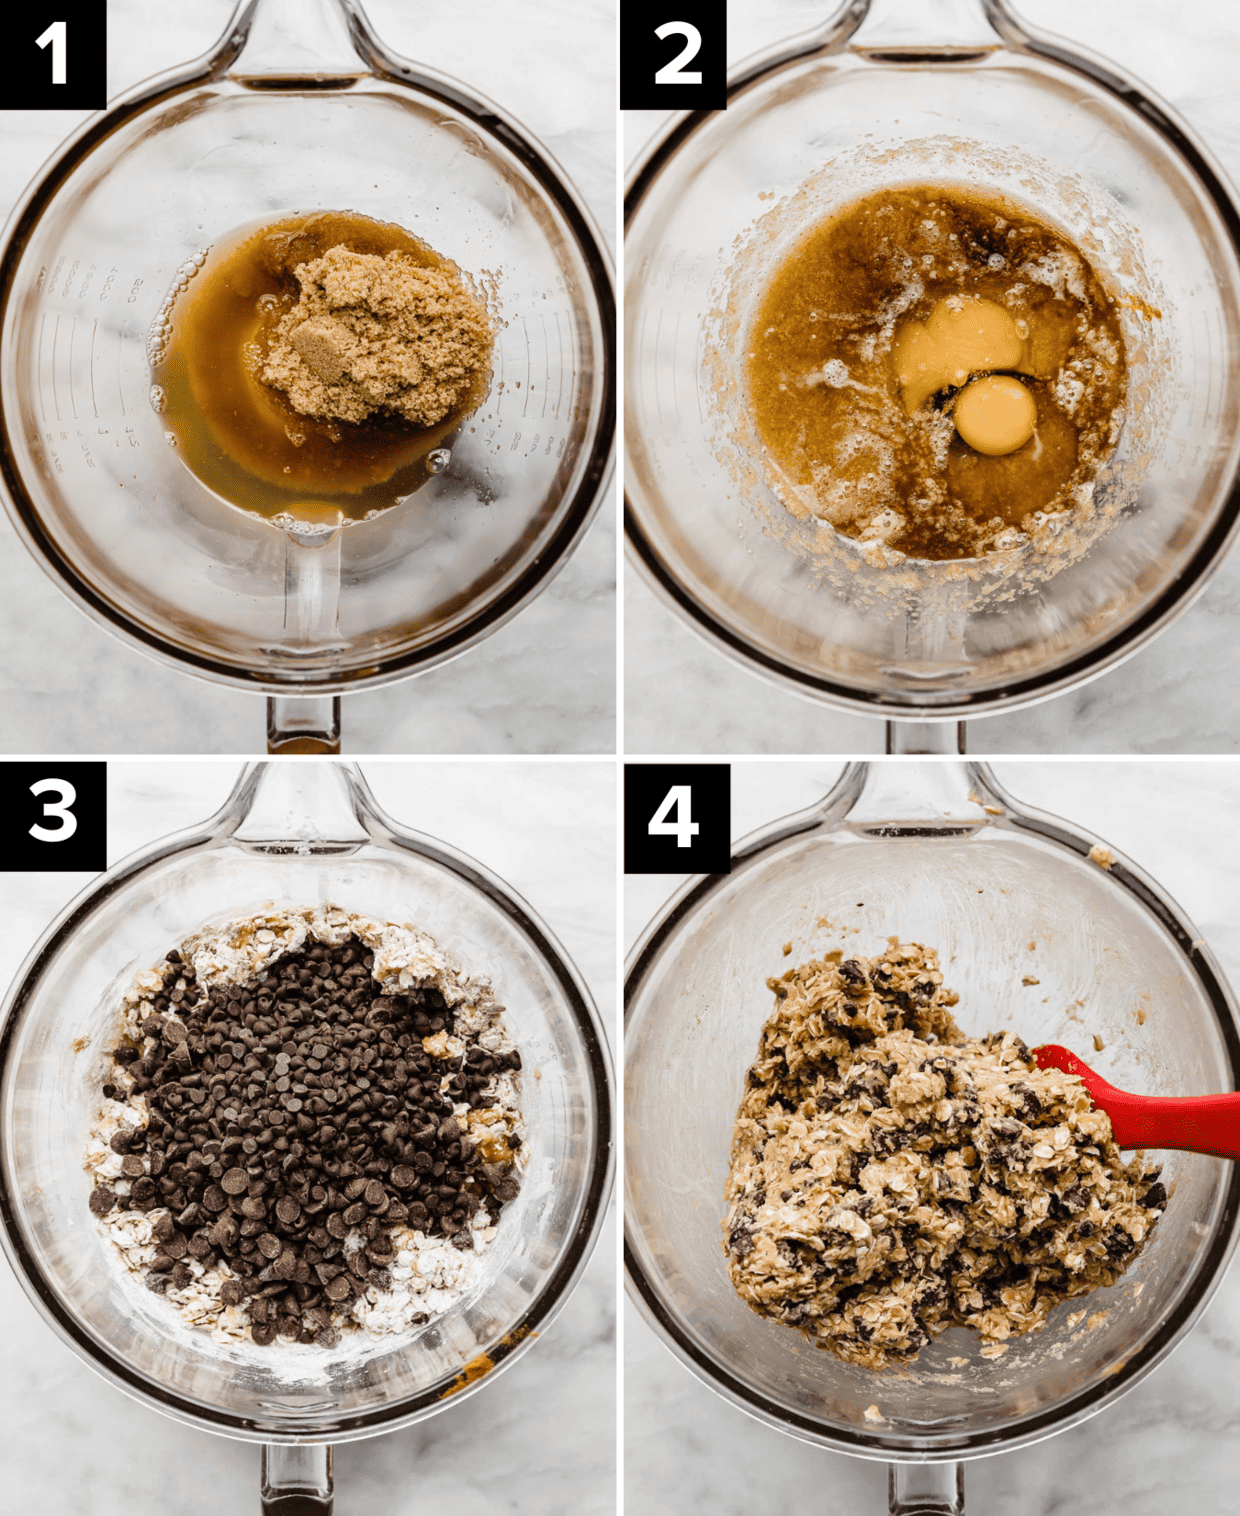 Four images showing the process of making oatmeal cookie bars with brown butter, in a glass bowl on a white background.